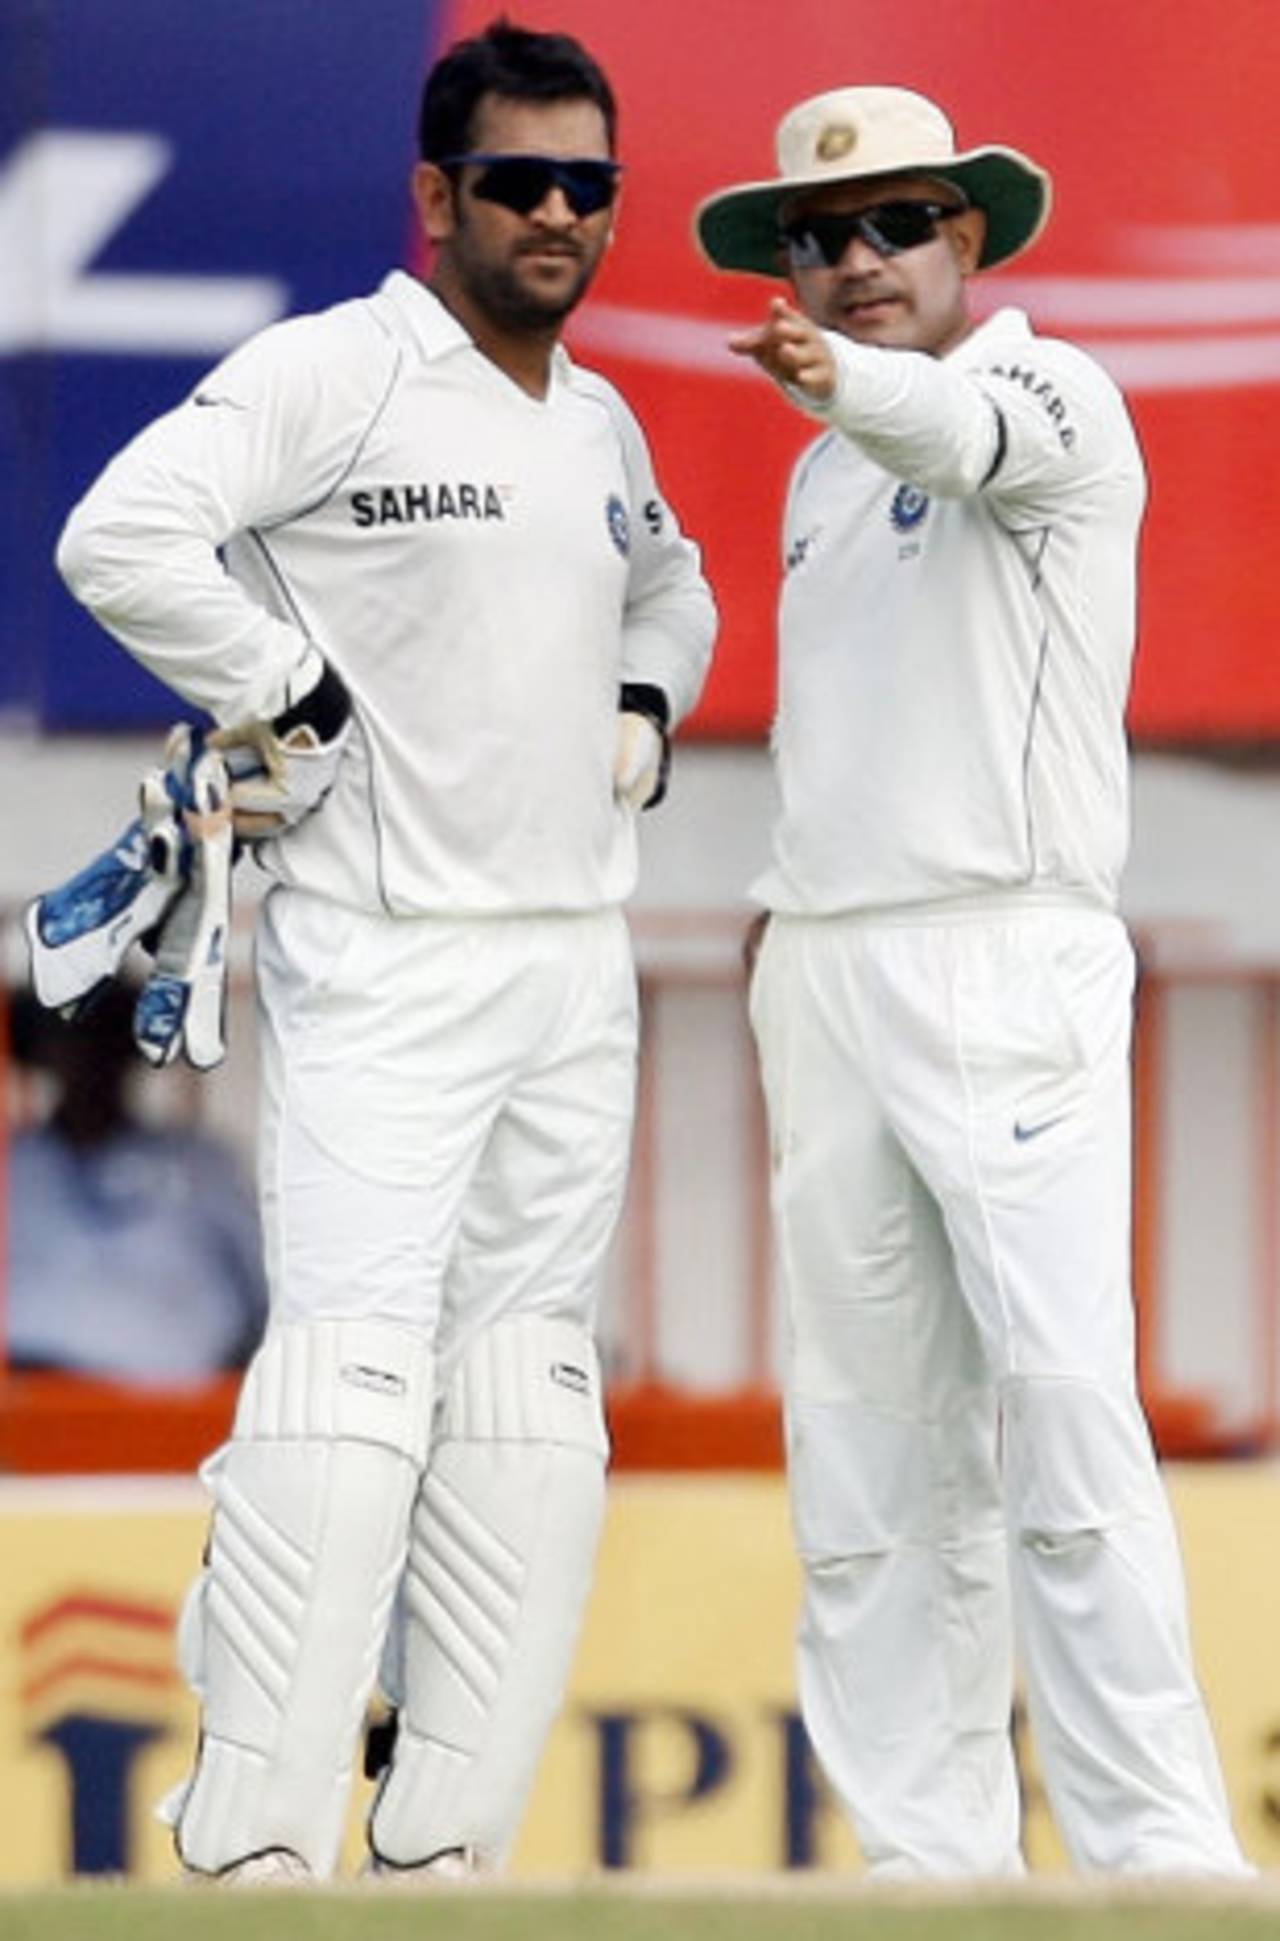 Mahendra Singh Dhoni and Virender Sehwag have an on-field discussion, India v England, 1st Test, Chennai, 1st day, December 11, 2008